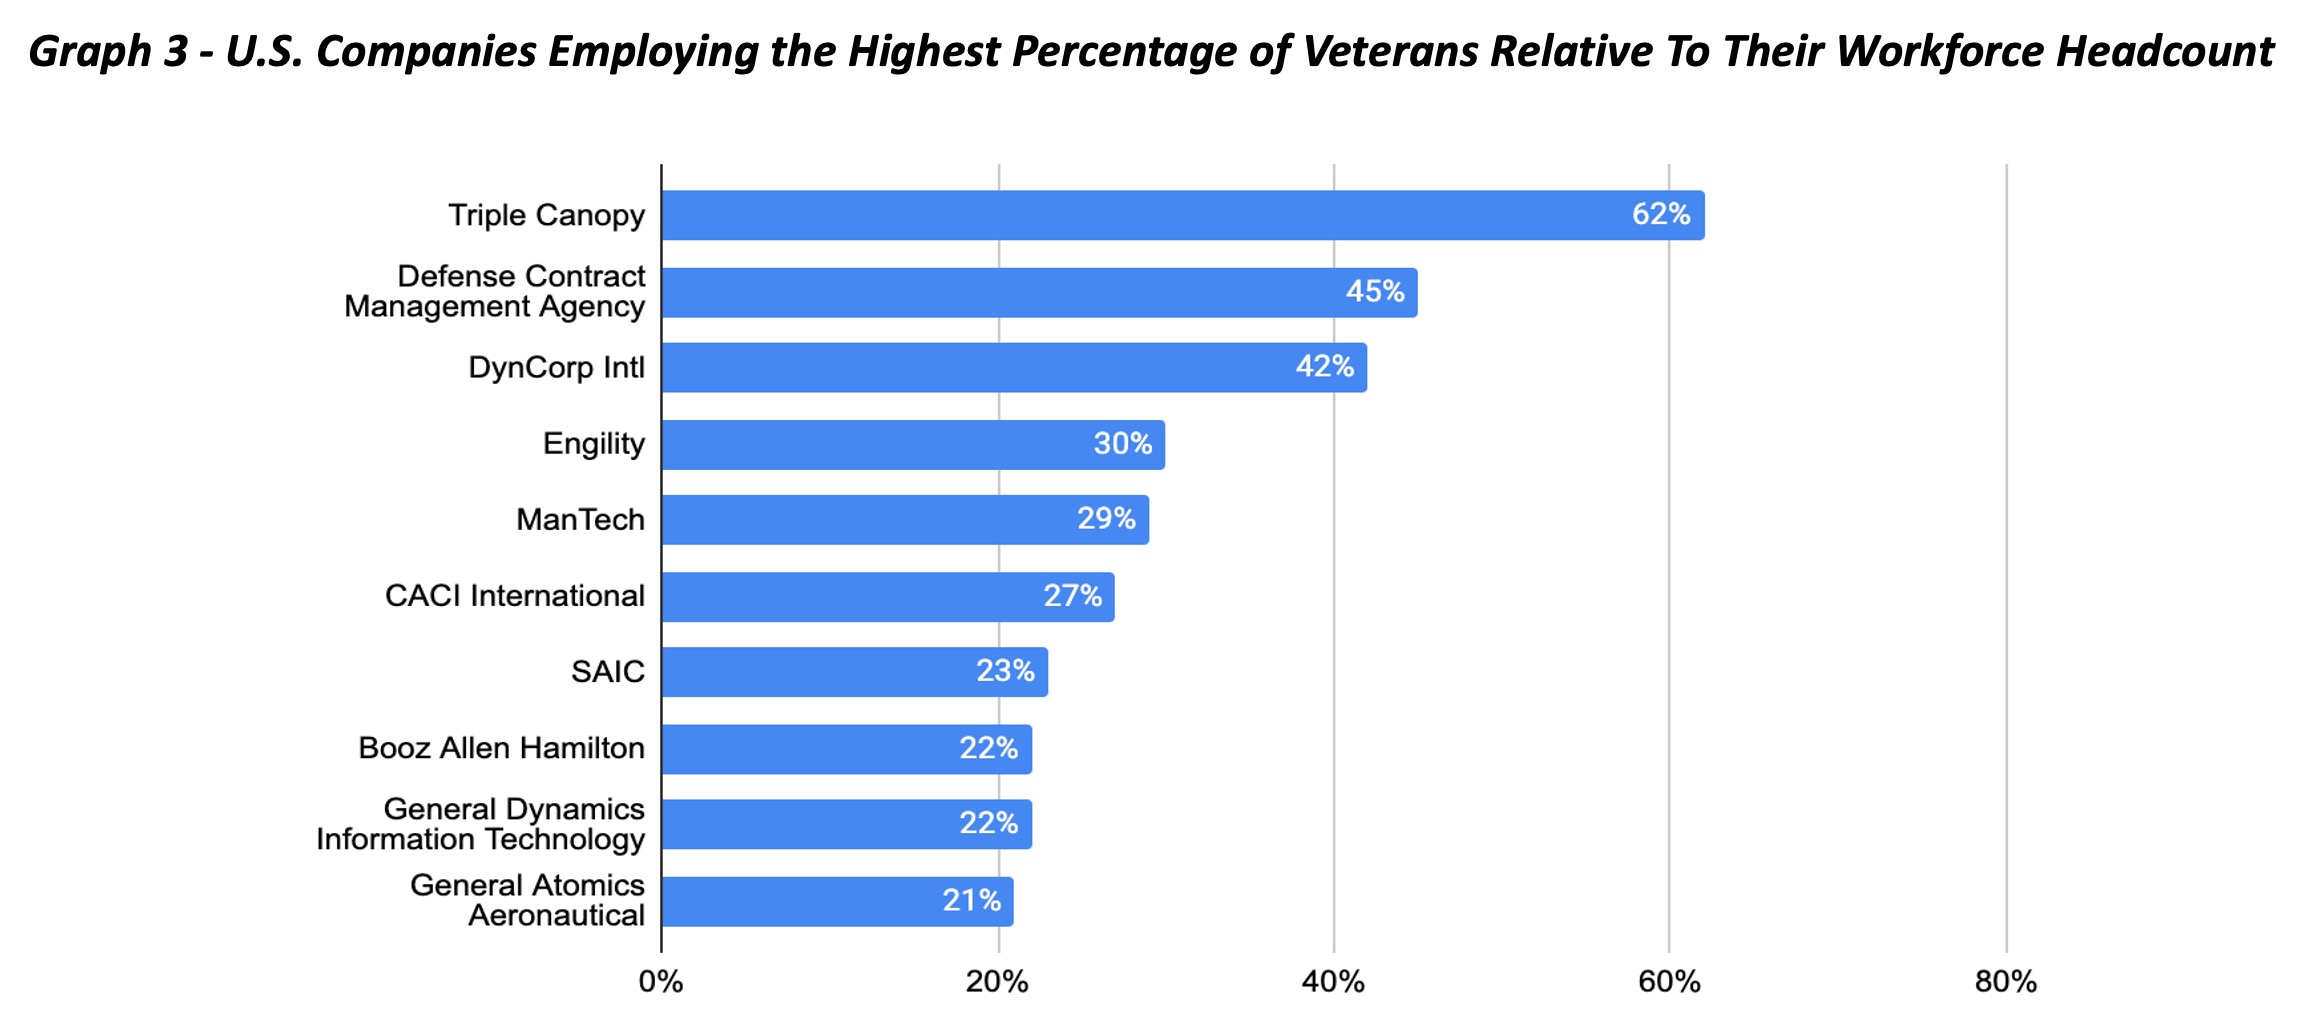 Graph 3 - U.S. Companies Employing the Highest Percentage of Veterans